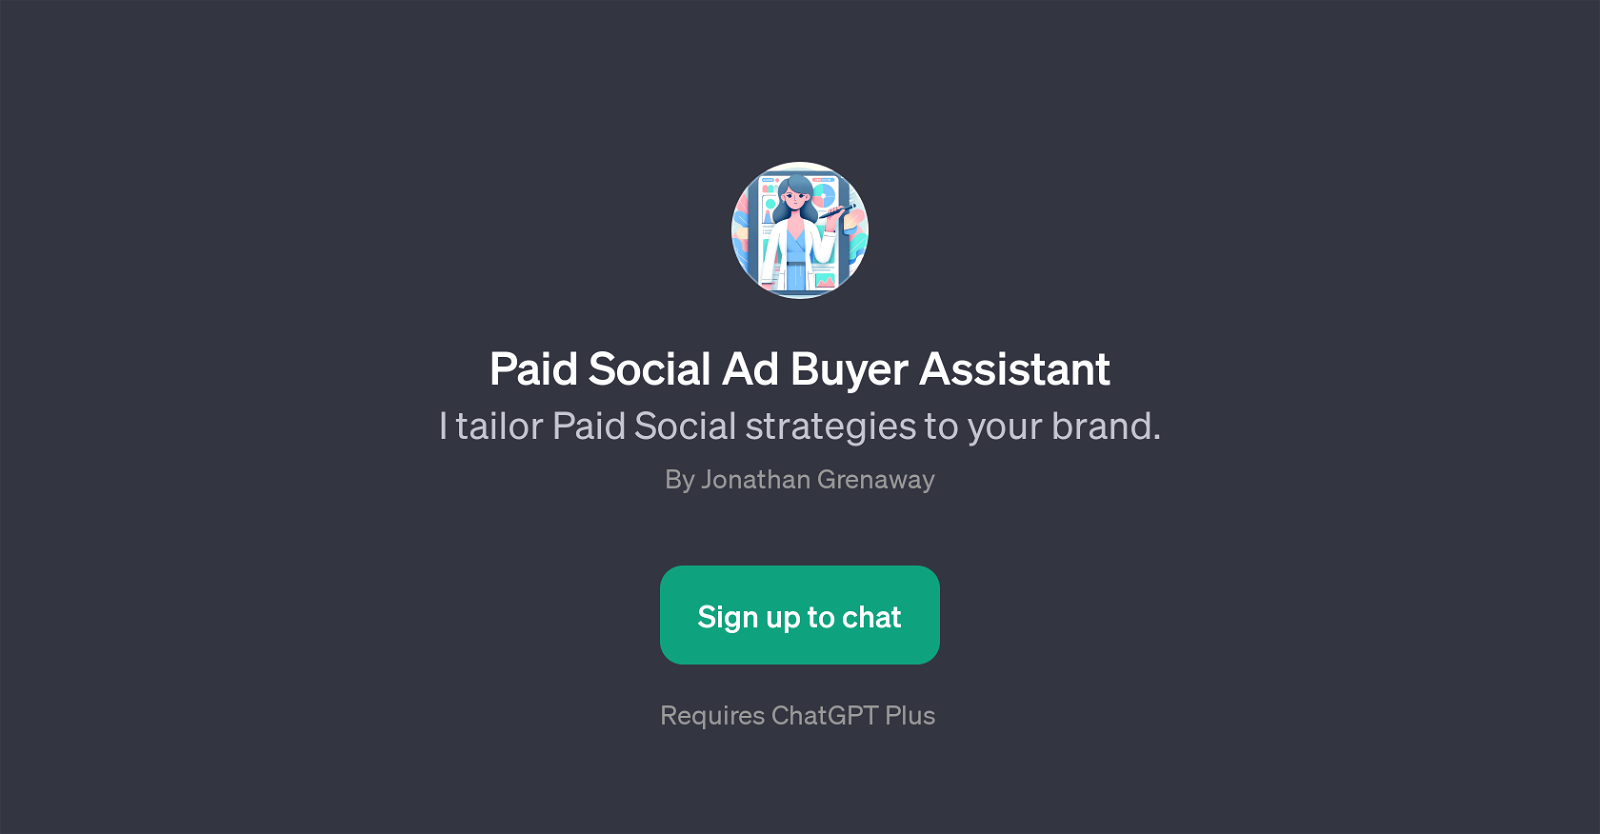 Paid Social Ad Buyer Assistant website